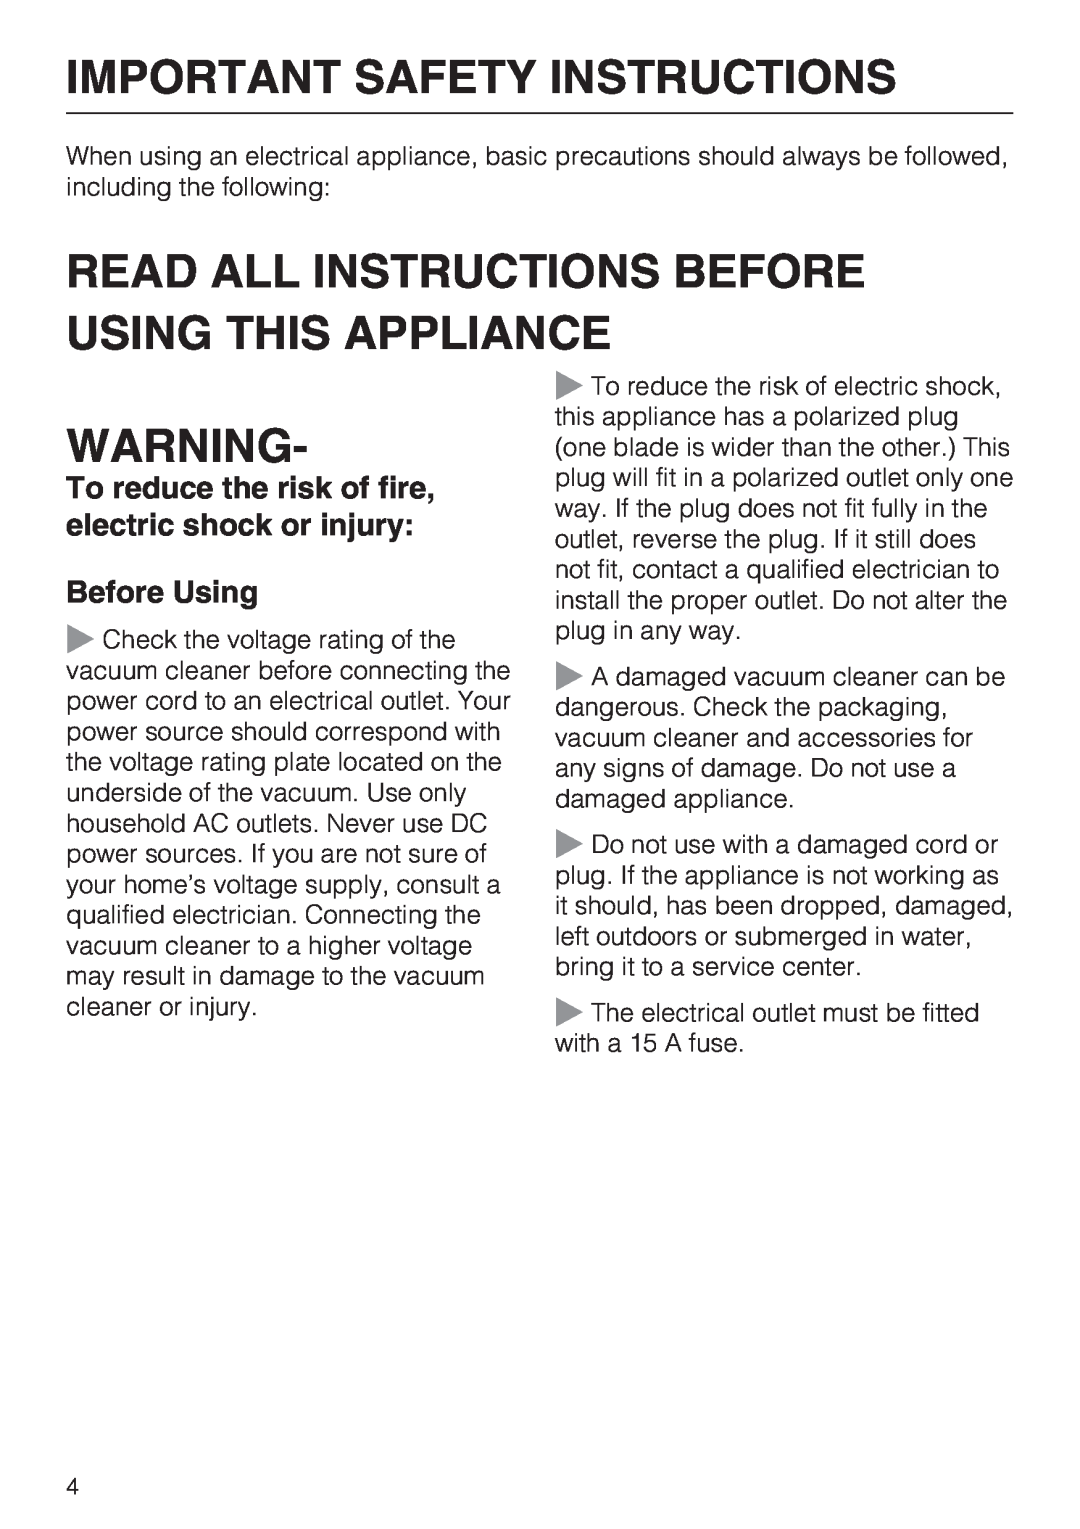 Miele S 2000 operating instructions Important Safety Instructions, Read All Instructions Before Using This Appliance 